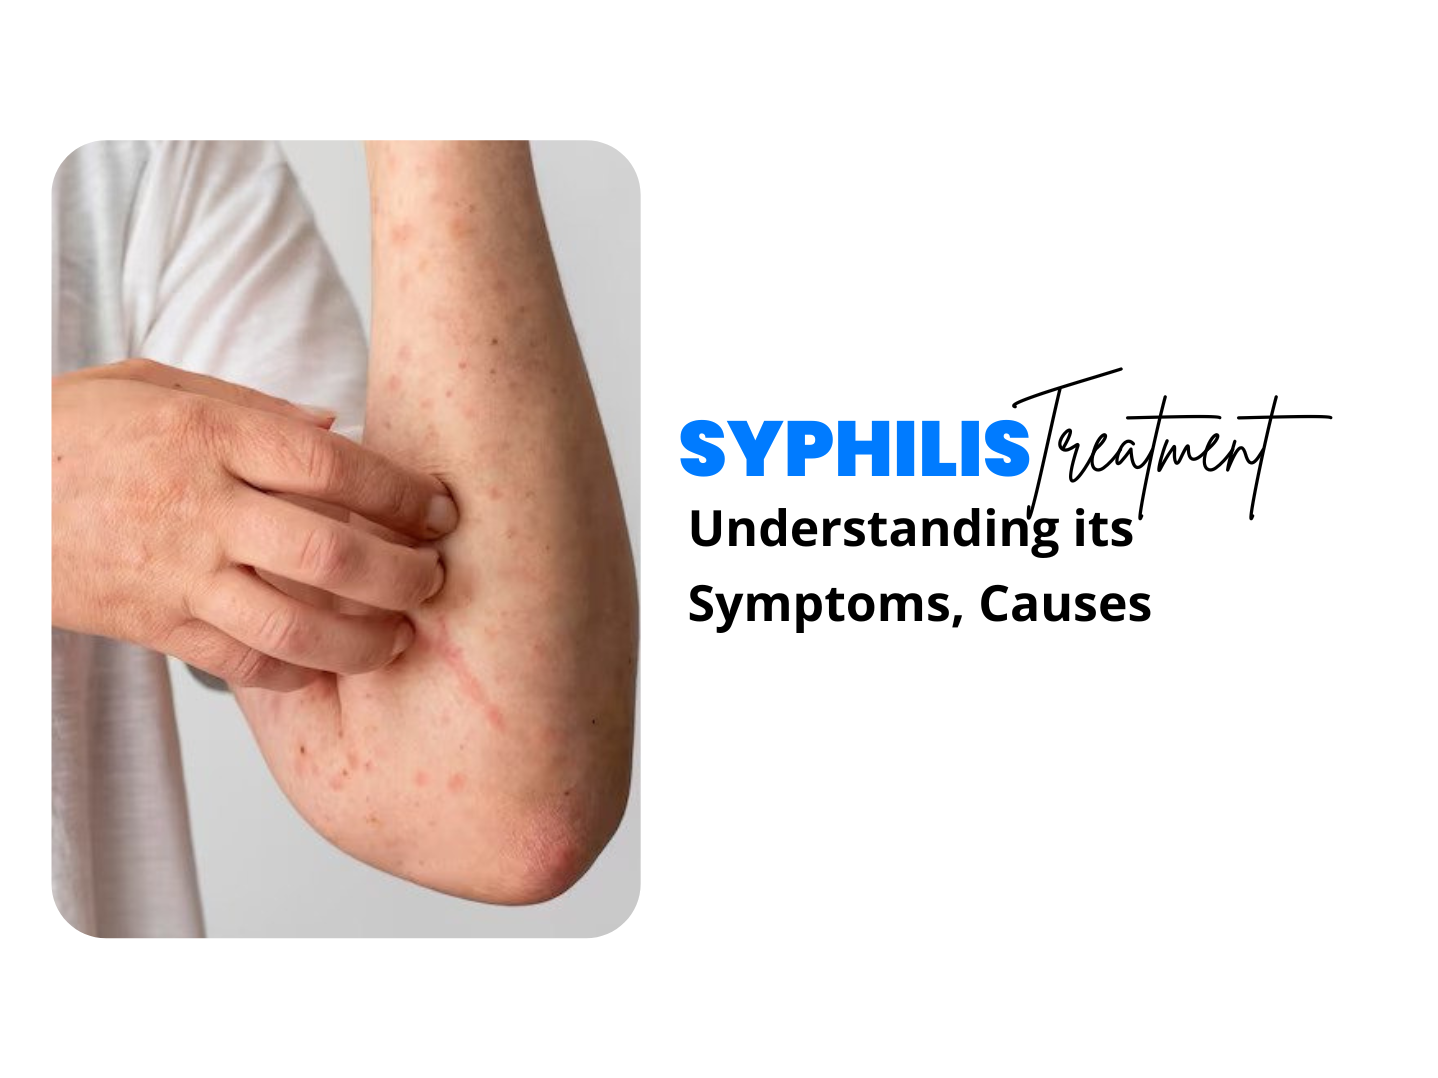 Syphilis: Understanding its Symptoms, Causes, Diagnosis, and Treatment